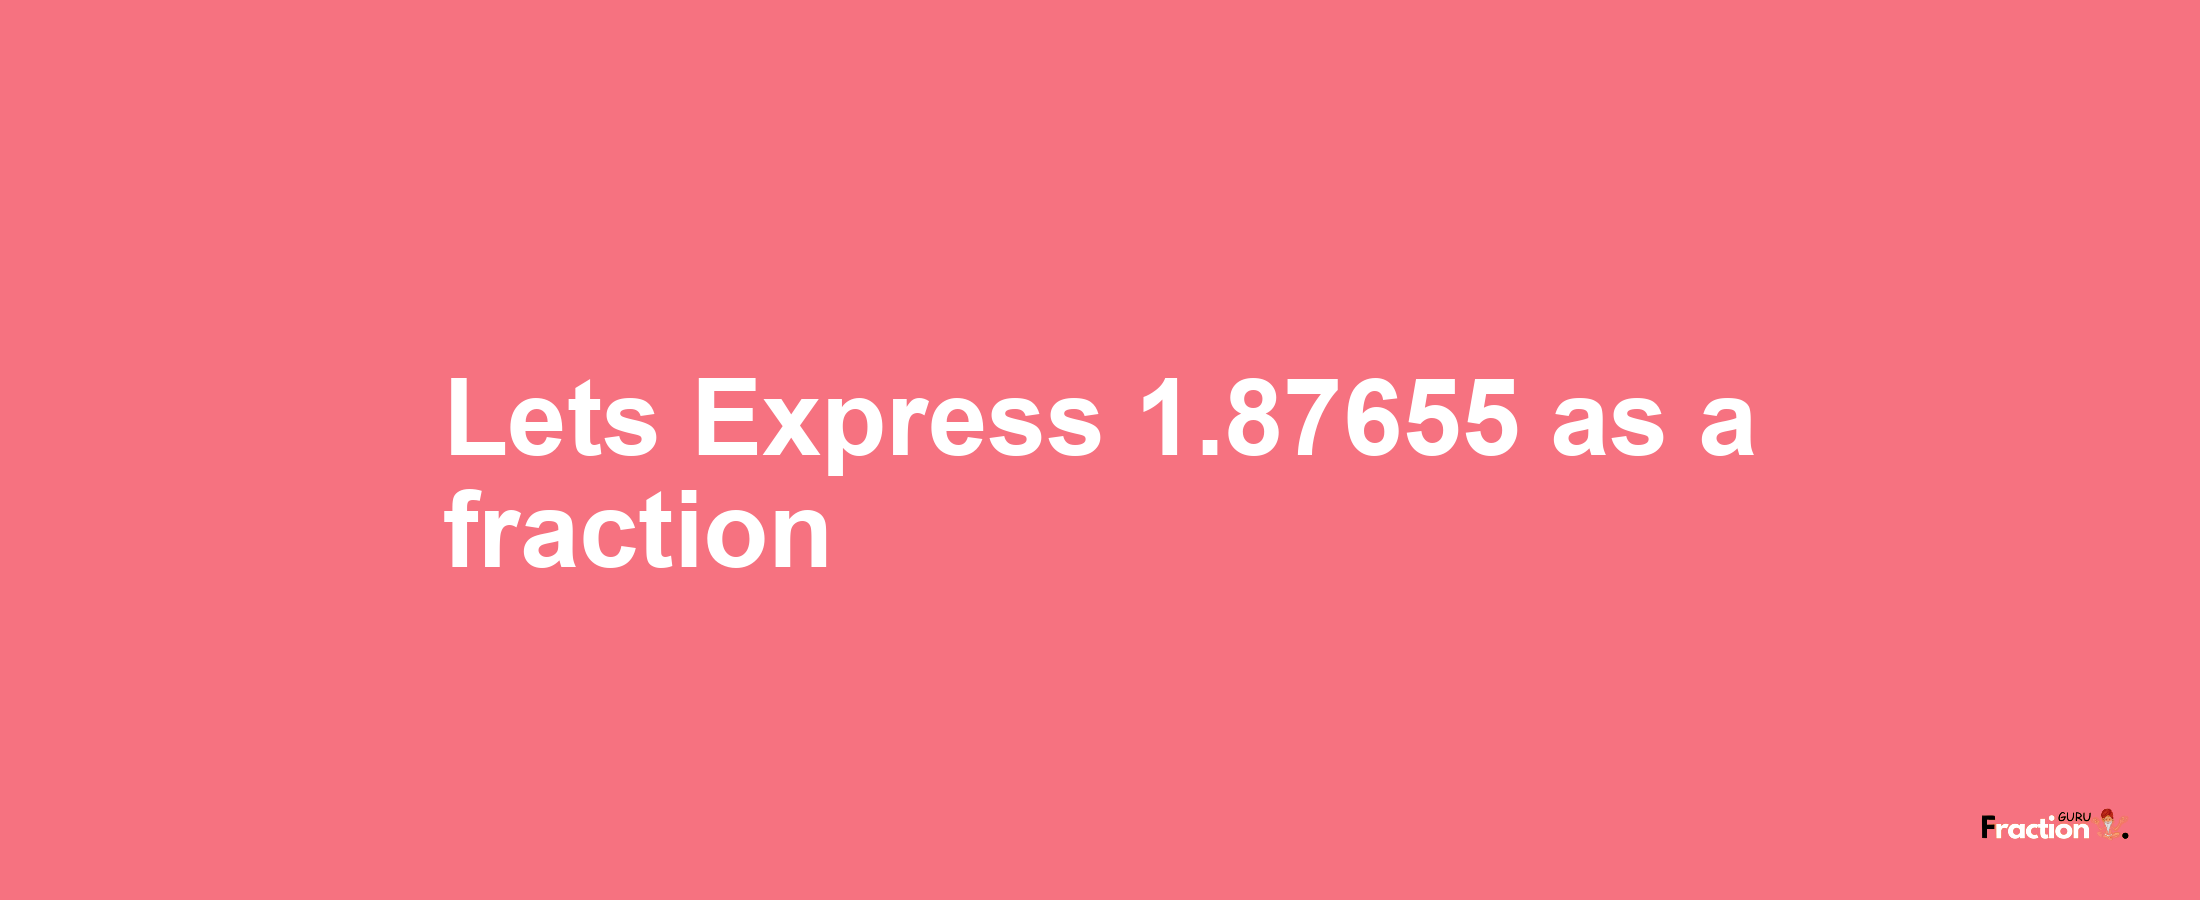 Lets Express 1.87655 as afraction